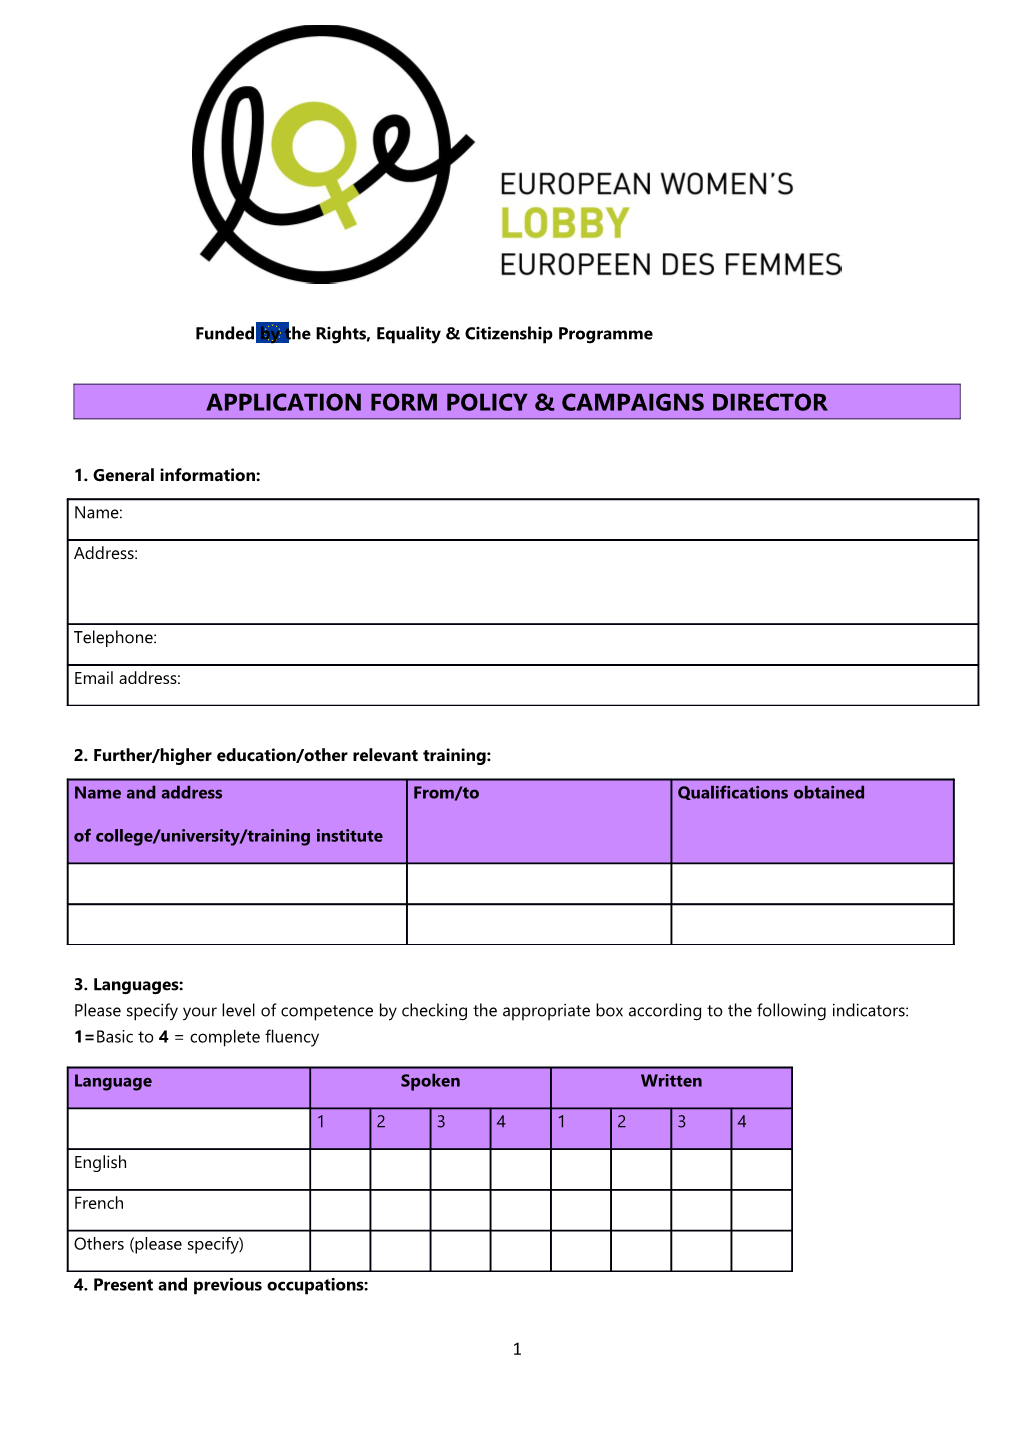 Application Form Policy & Campaigns Director